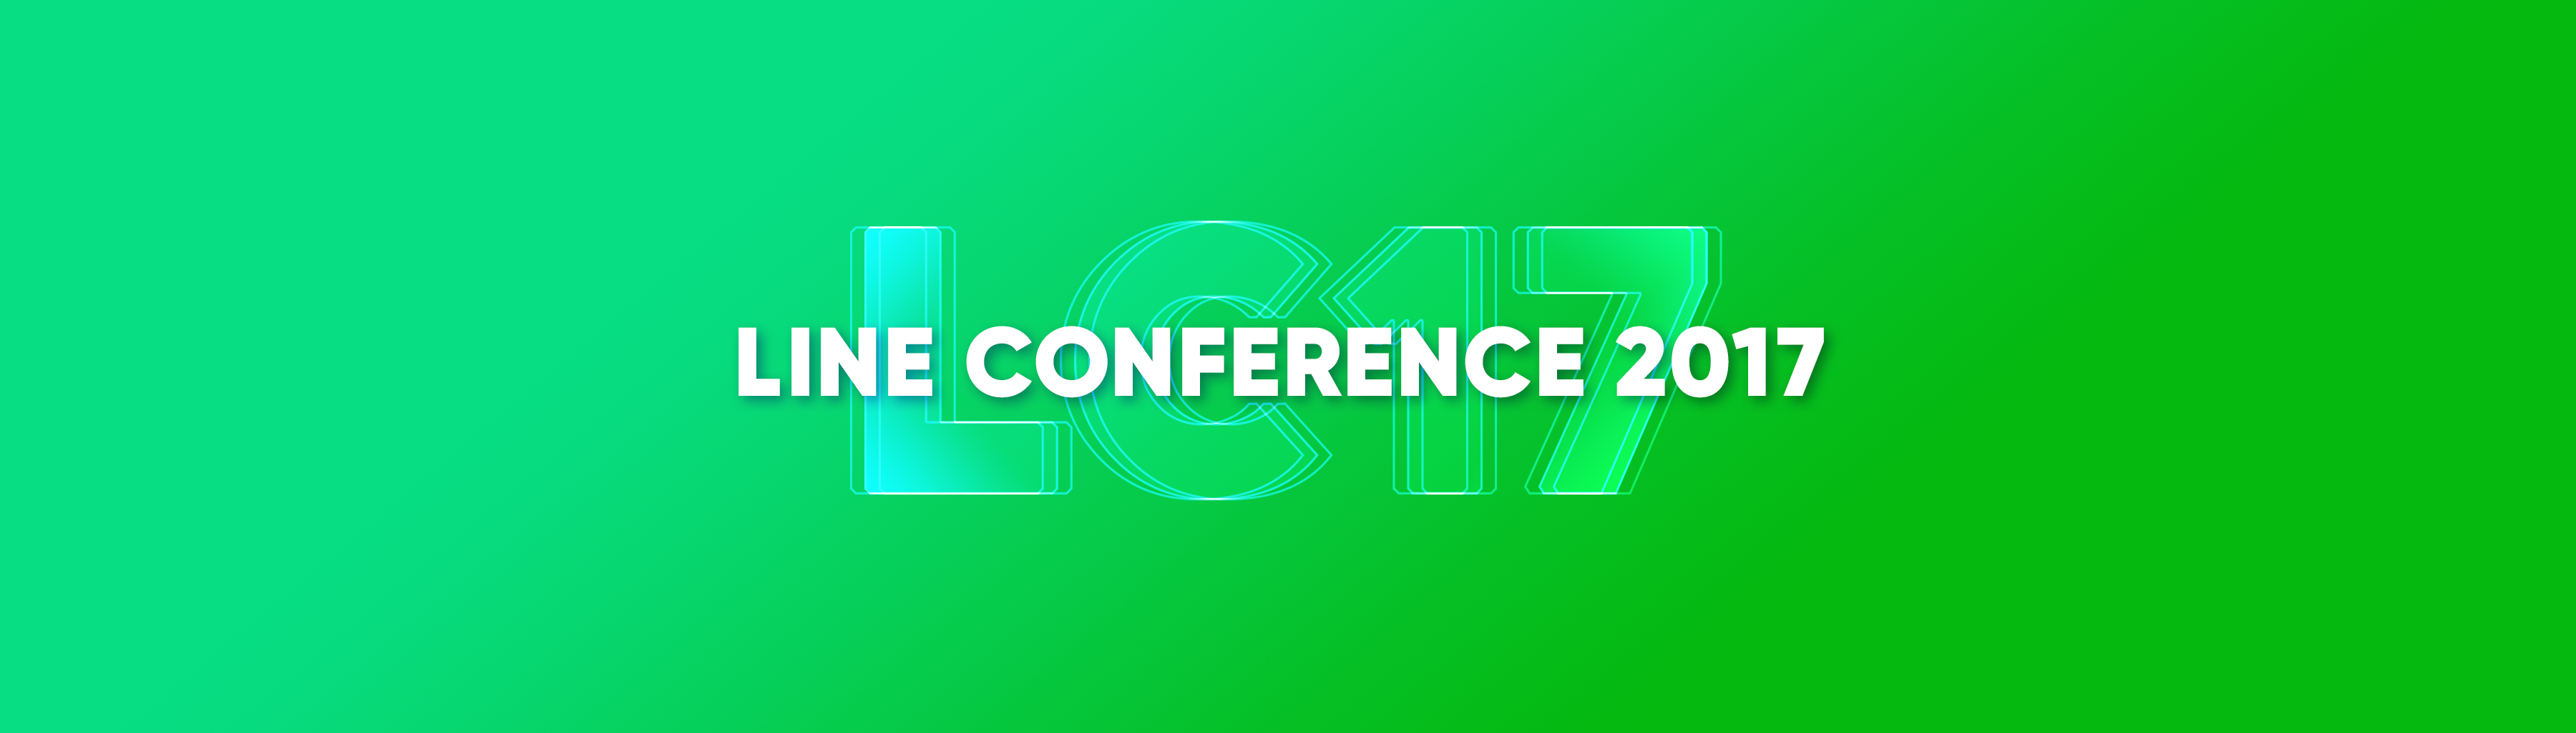 LINE Conference 2017